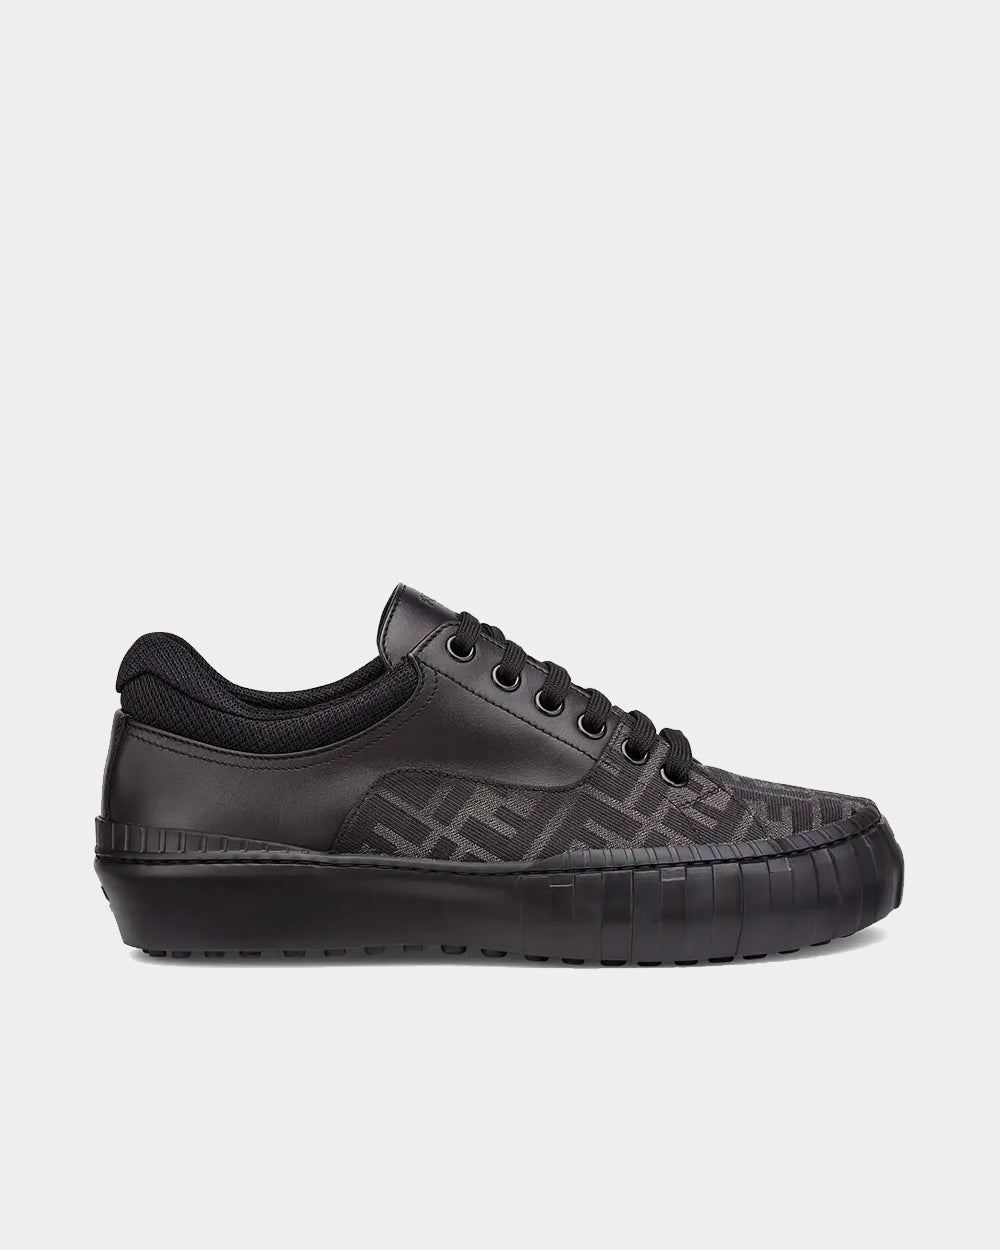 Breathable Comfortable And Washable Lightweight Black Louis Vuitton Fendi  Sneakers For Mens at Best Price in Faridabad